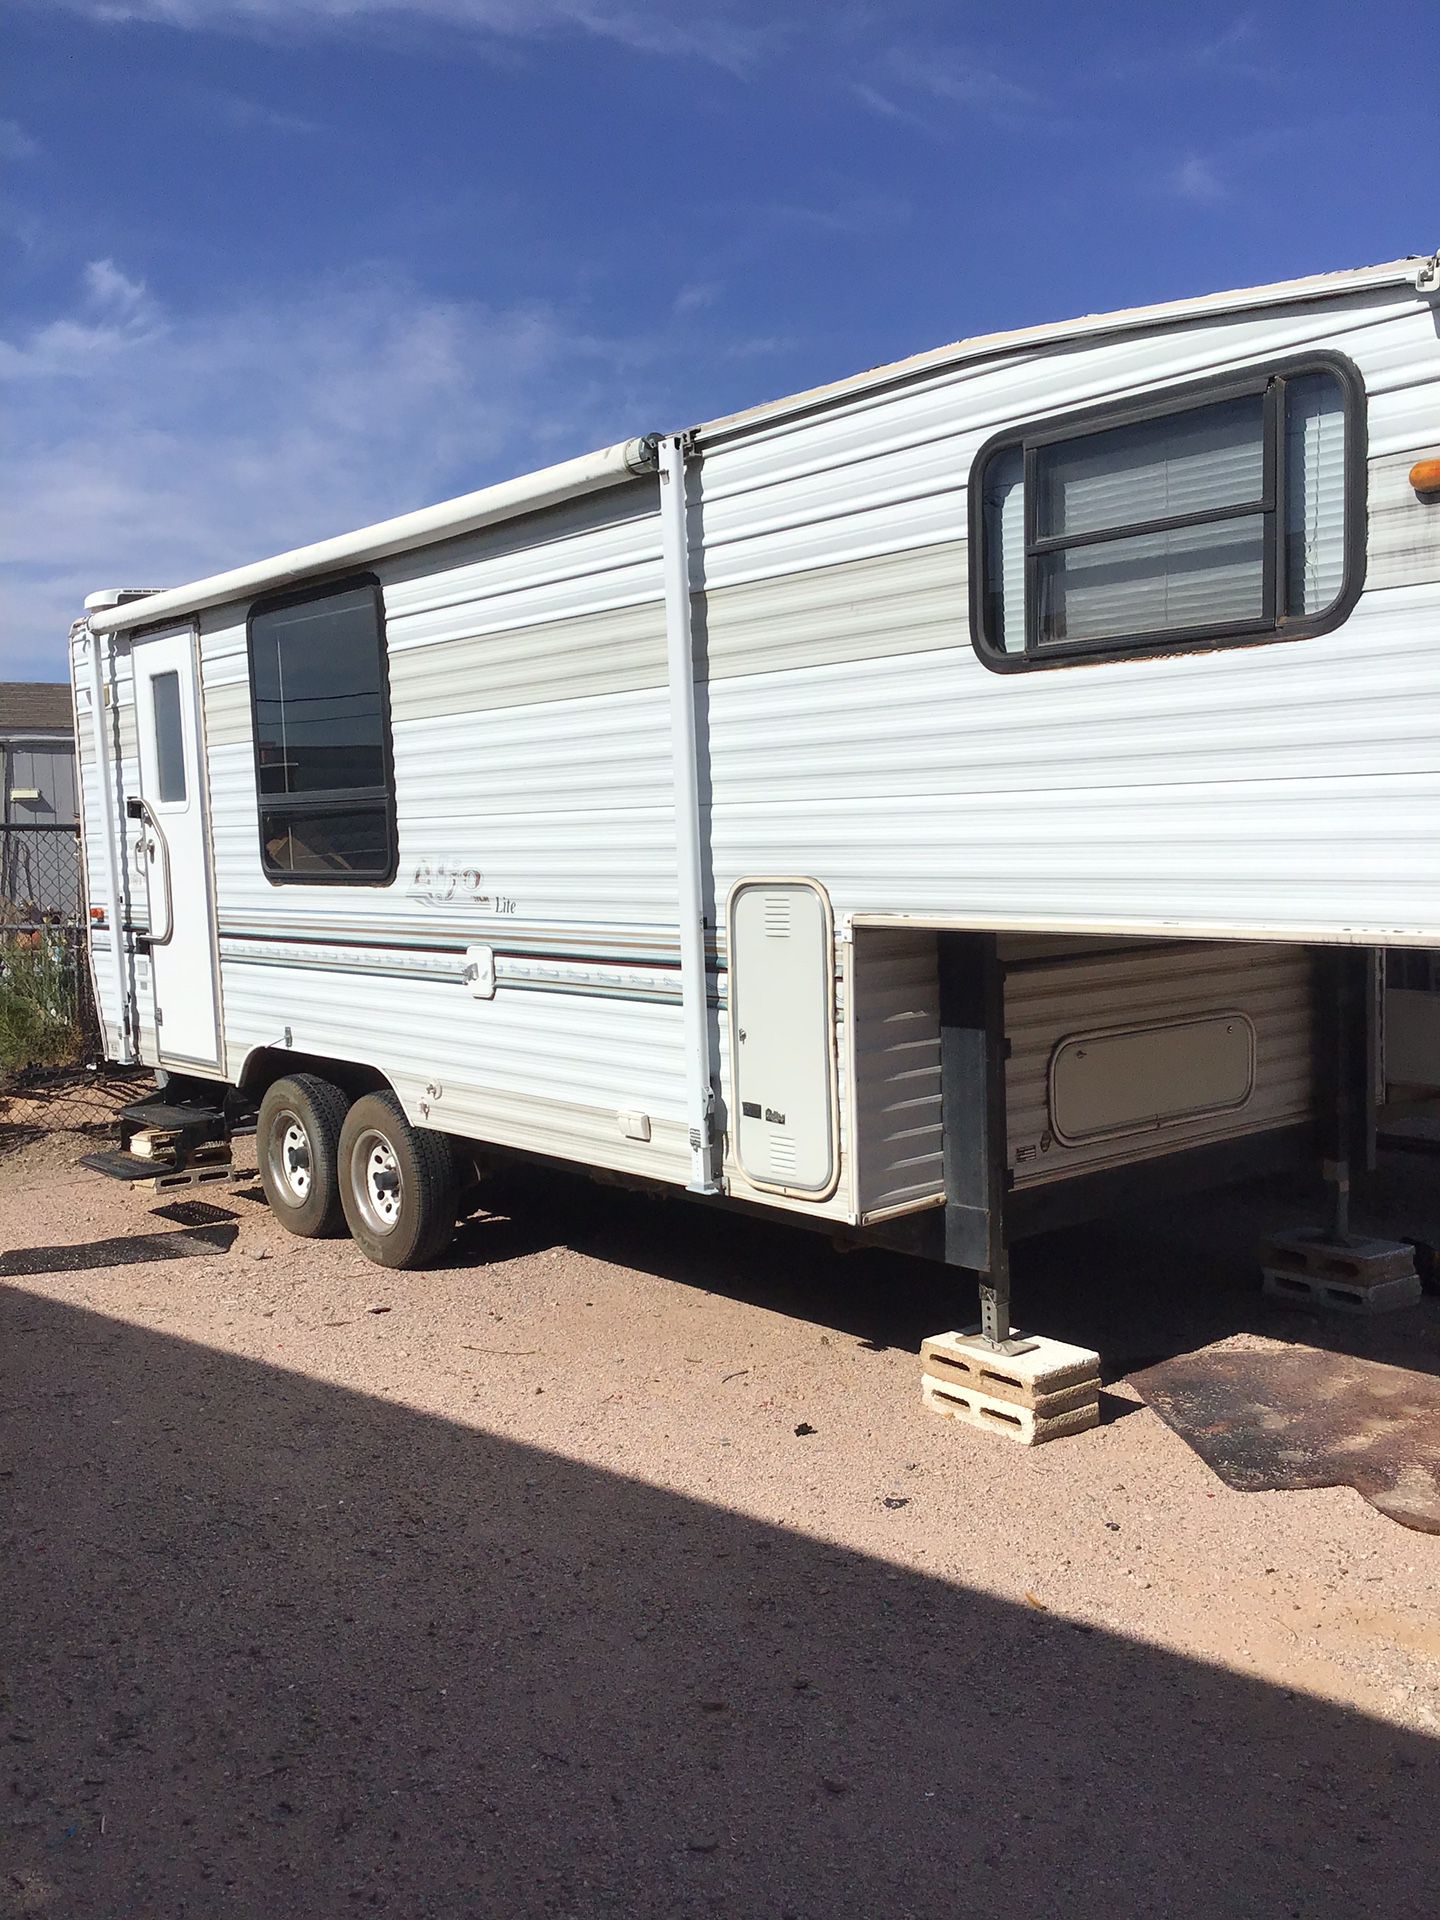 1998 Ajo 5th wheel camper. One slide out. Water damage.Needs work. tires ready to roll. 1350 obo